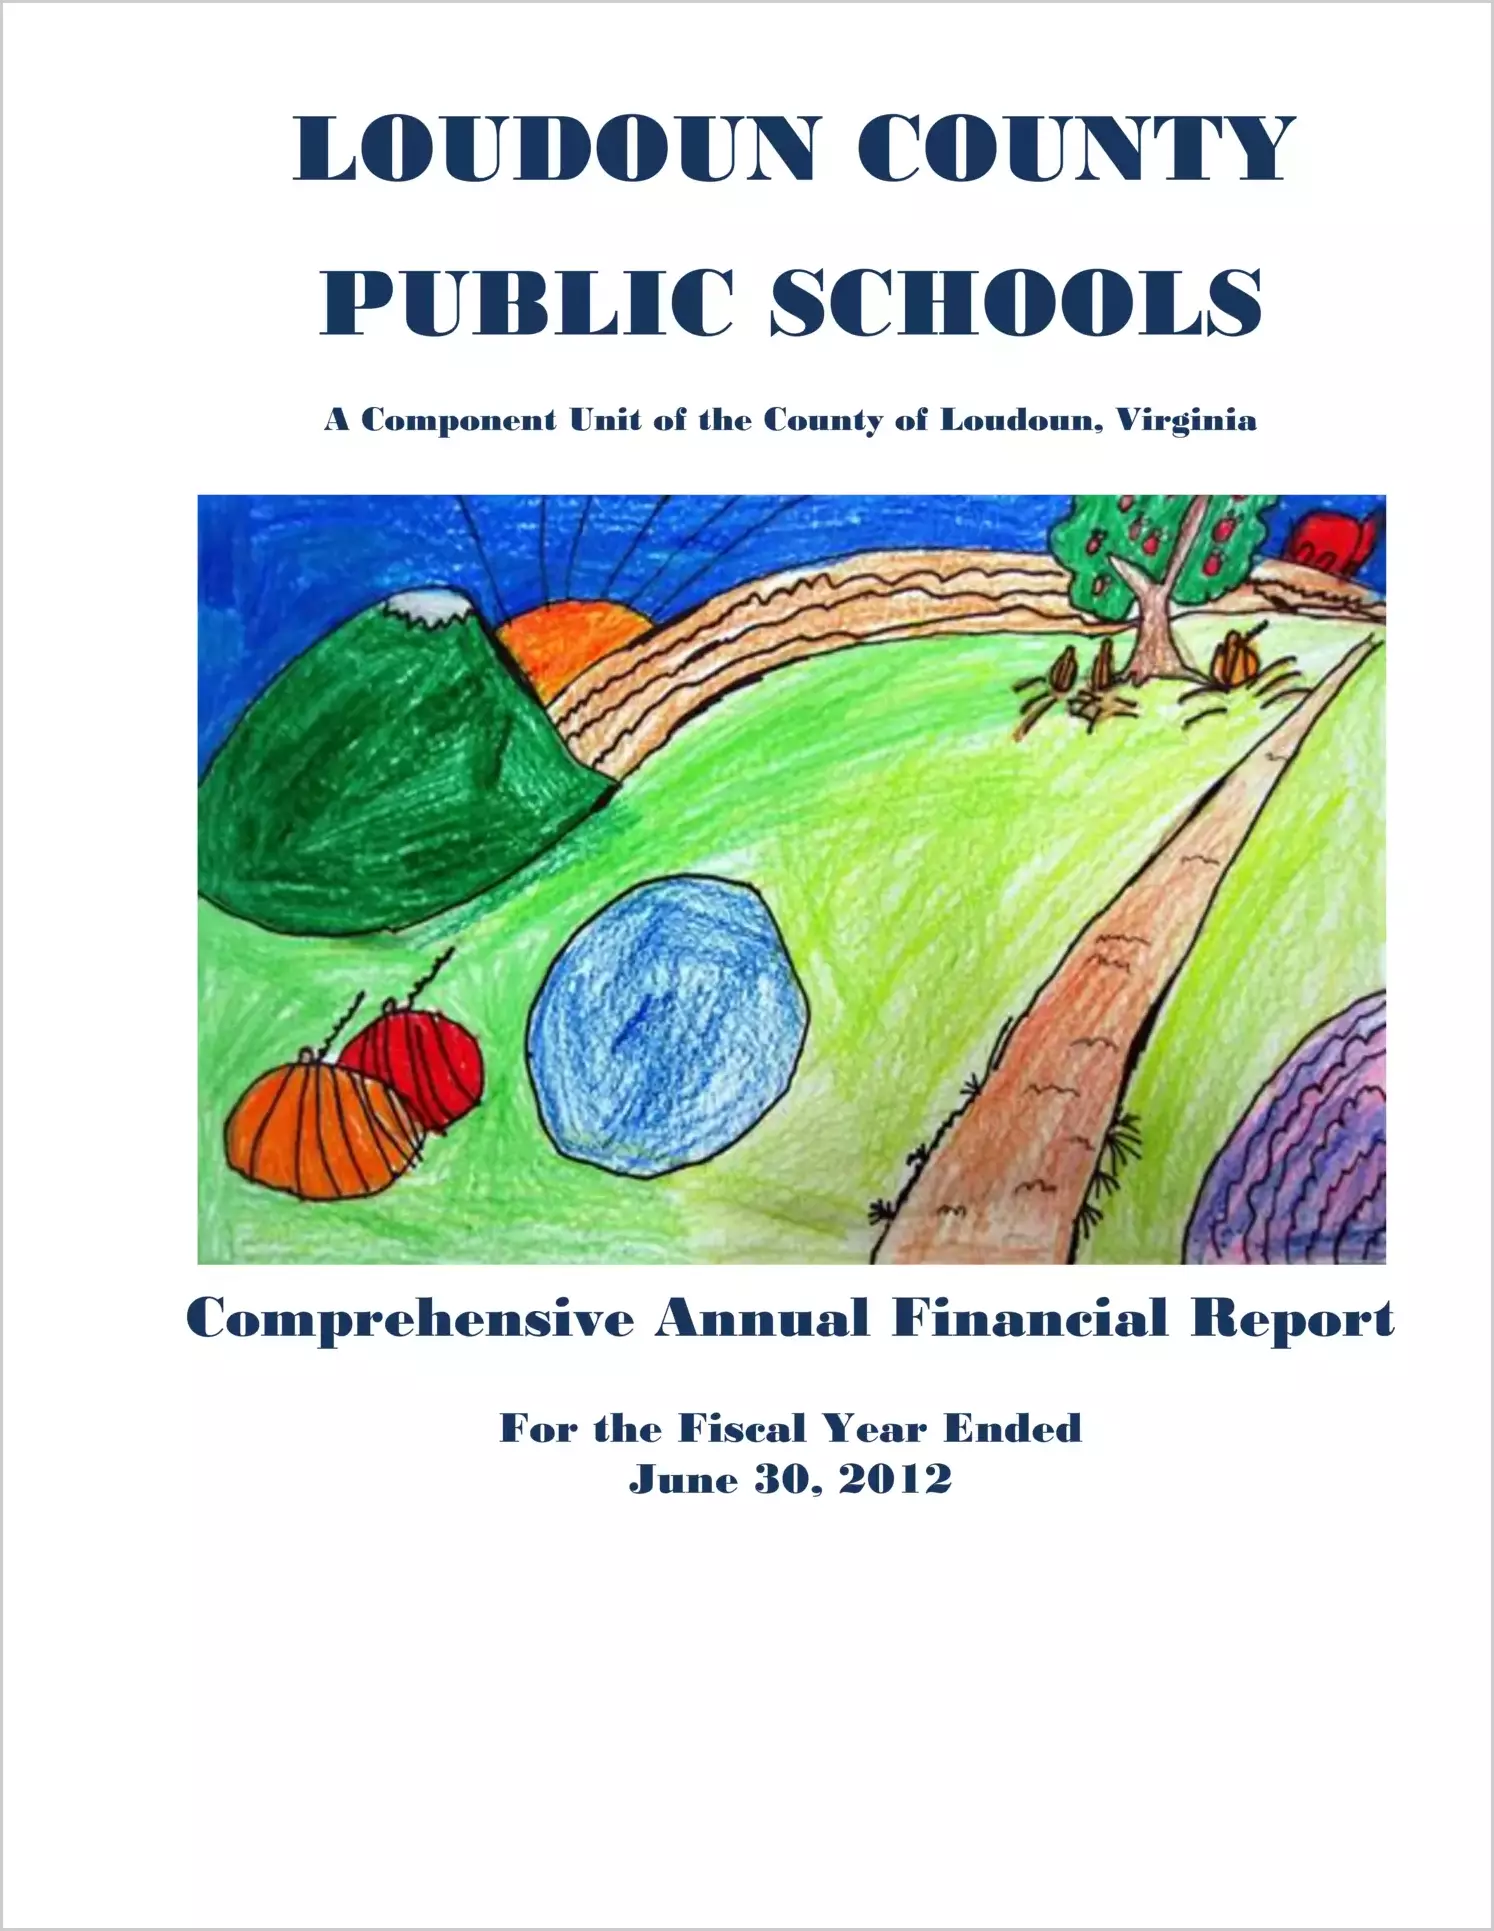 2012 Public Schools Annual Financial Report for County of Loudoun